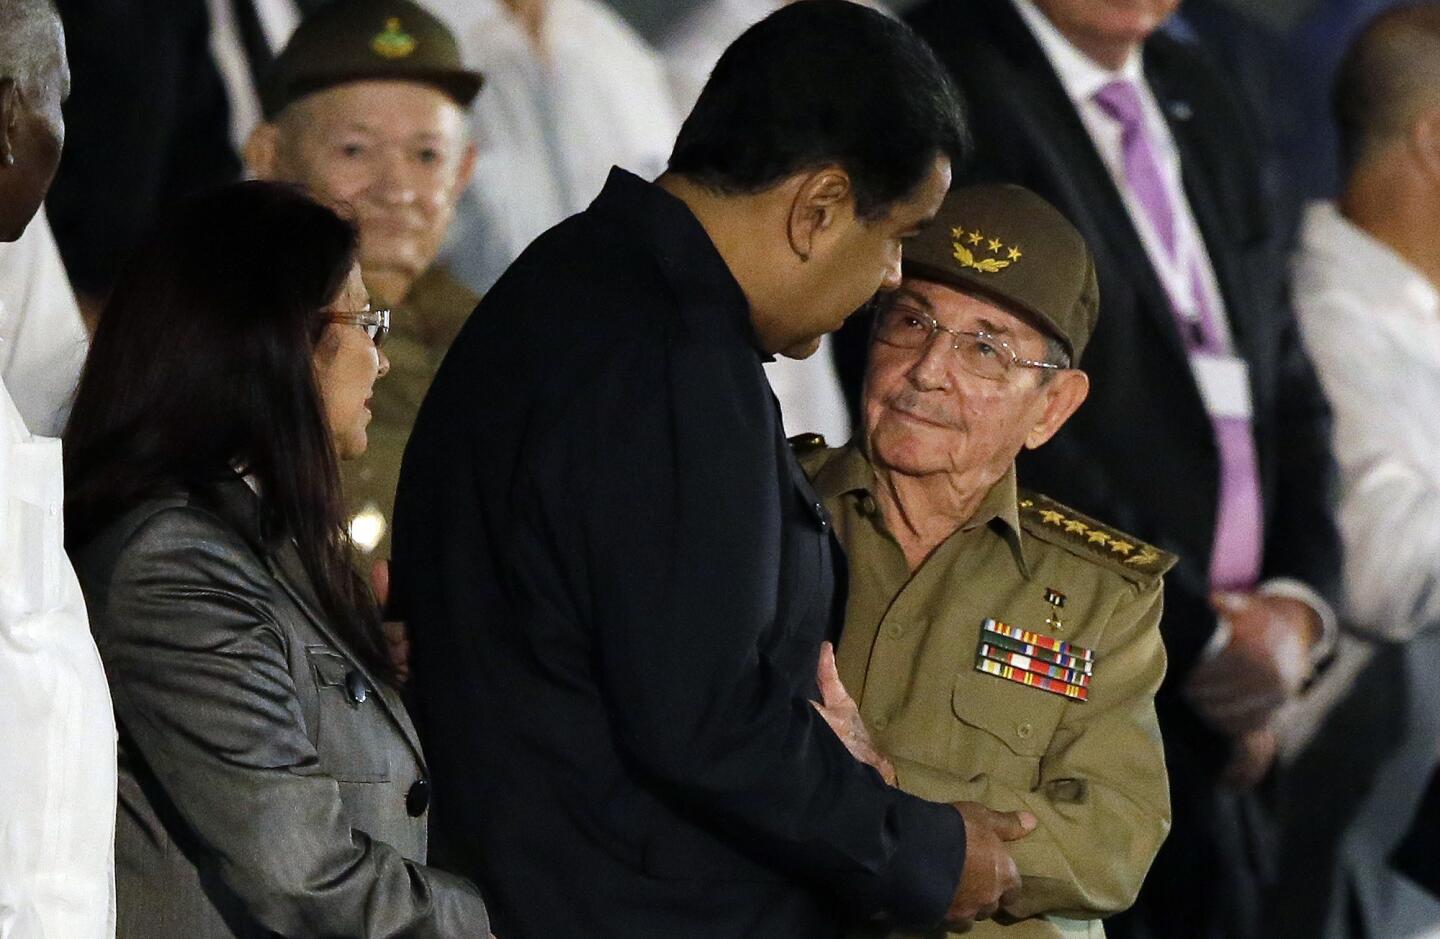 Raul Castro attends rally